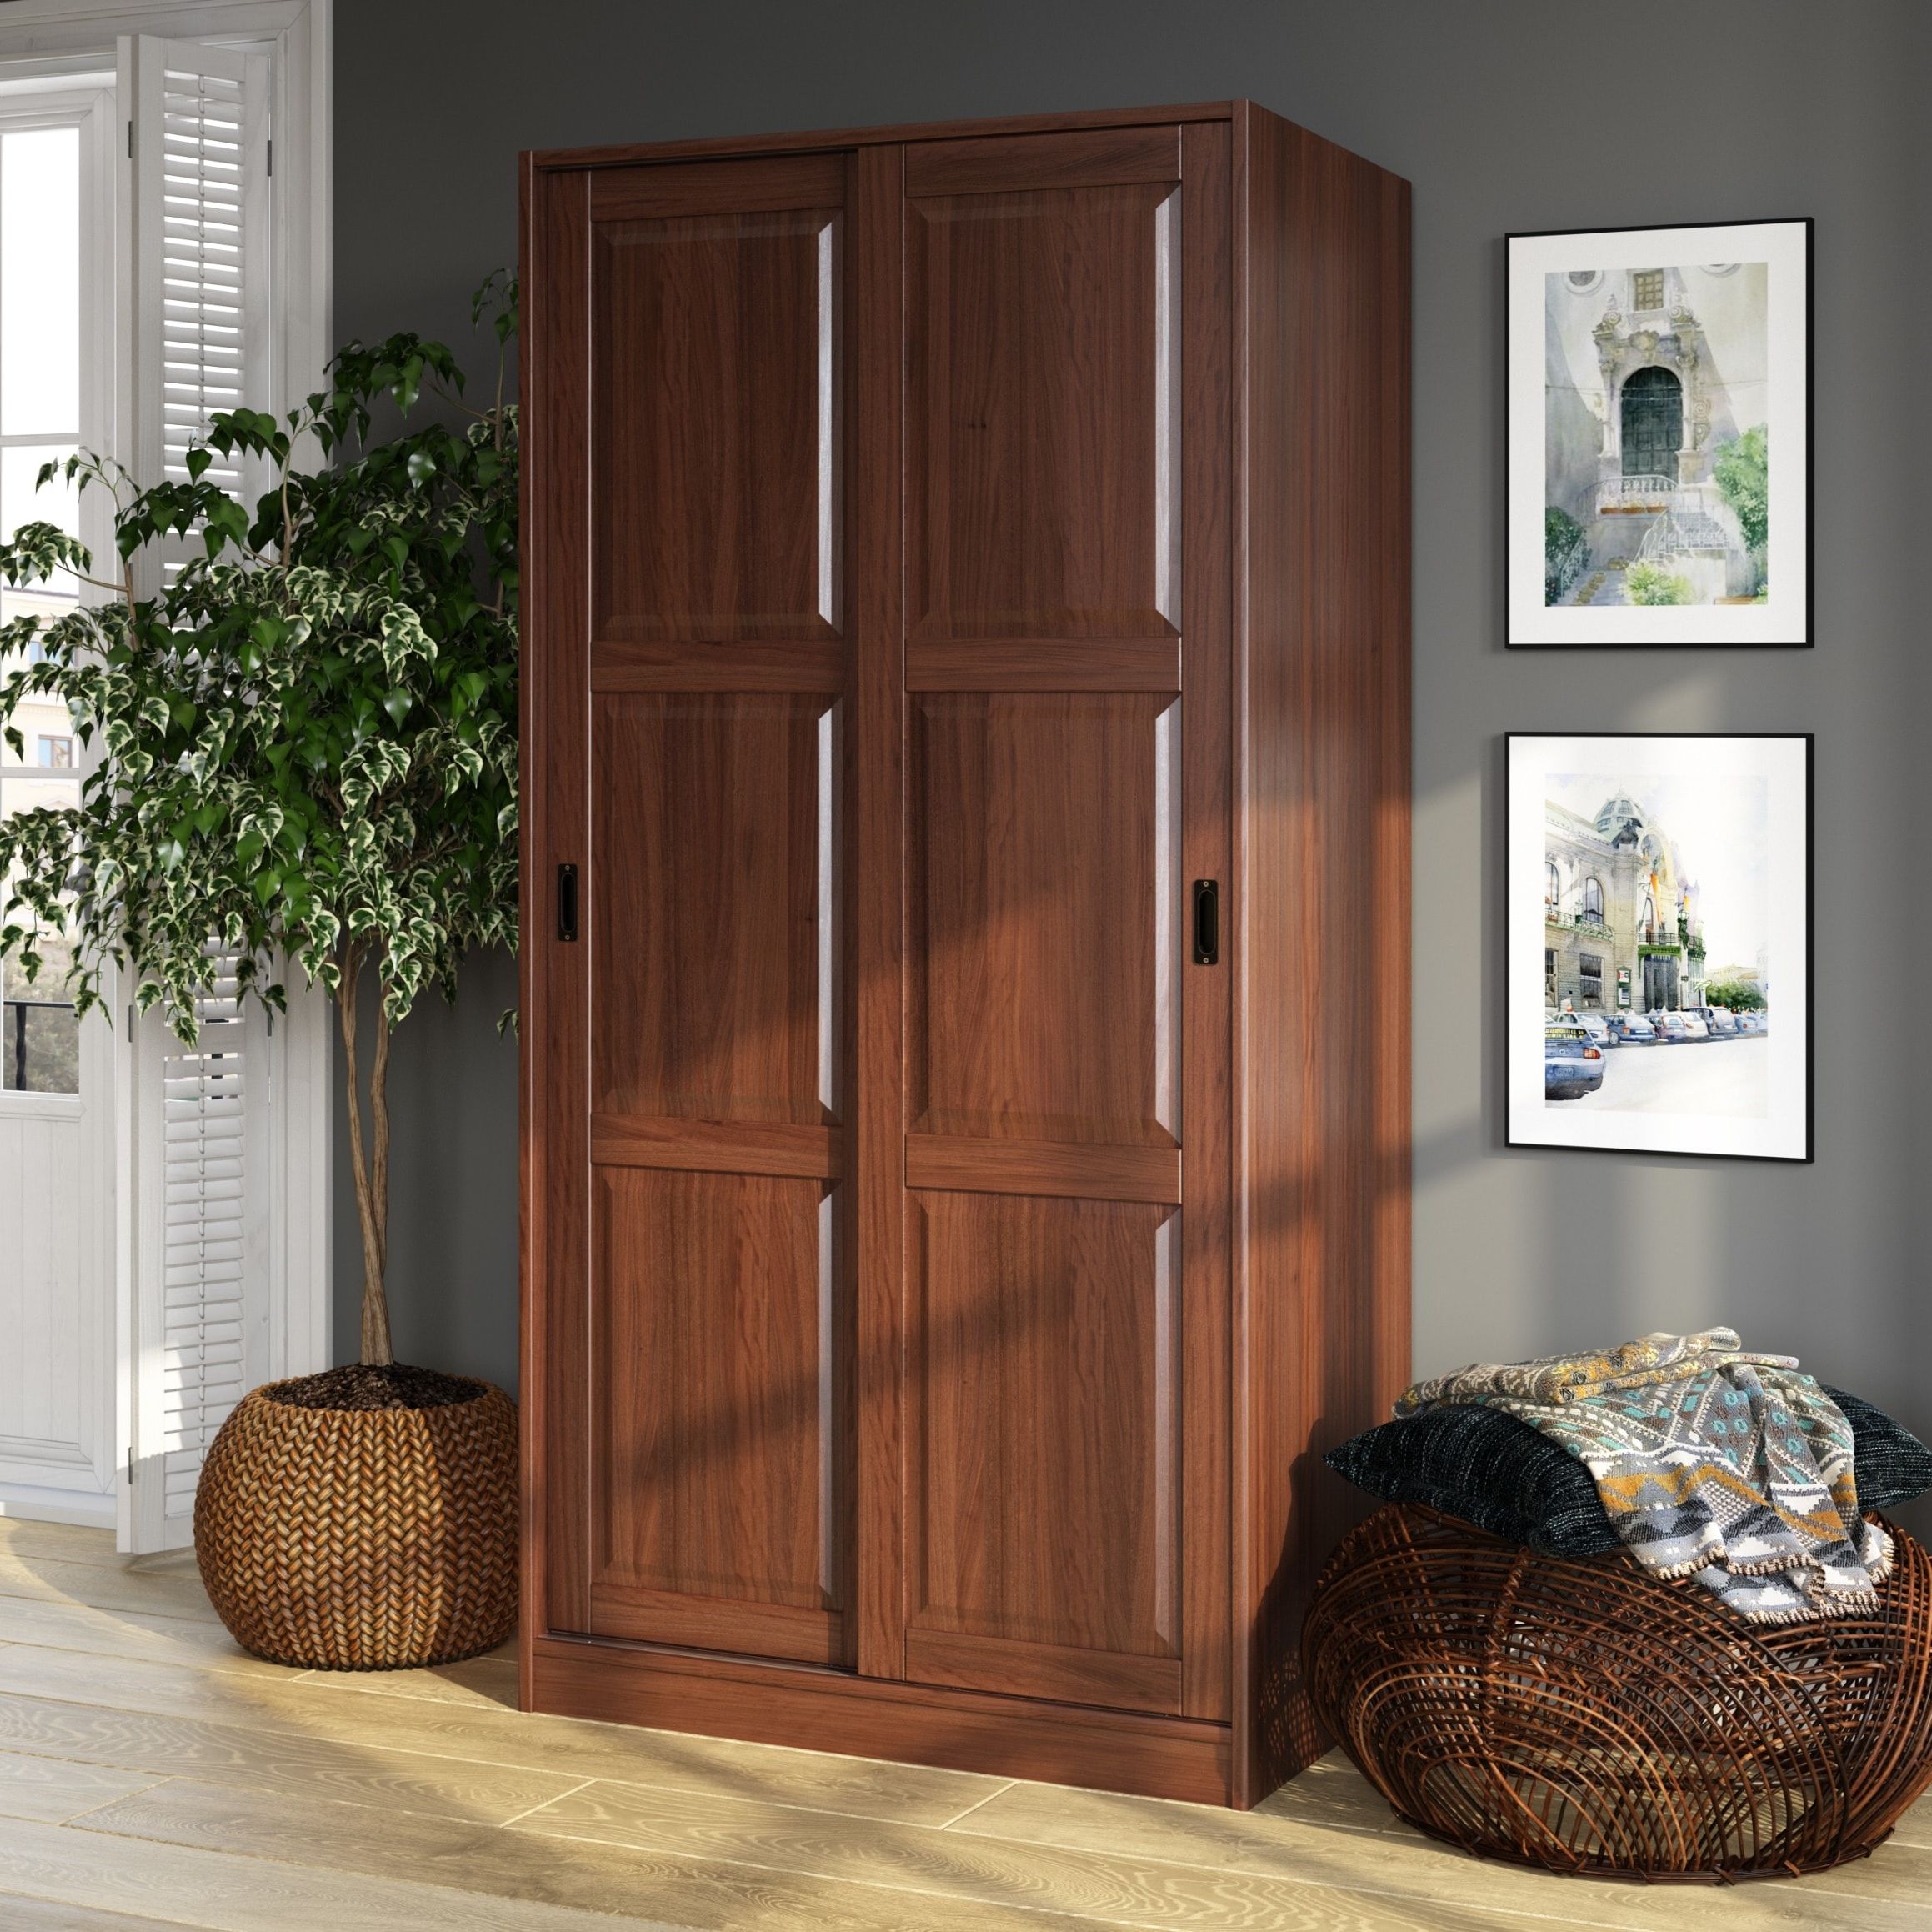 Palace Imports 100% Solid Wood 2 Sliding Door Wardrobe Armoire With  Mirrored, Closed Louvered Or Raised Panel Doors – Bed Bath & Beyond –  20000830 Regarding Cheap Solid Wood Wardrobes (Gallery 13 of 20)